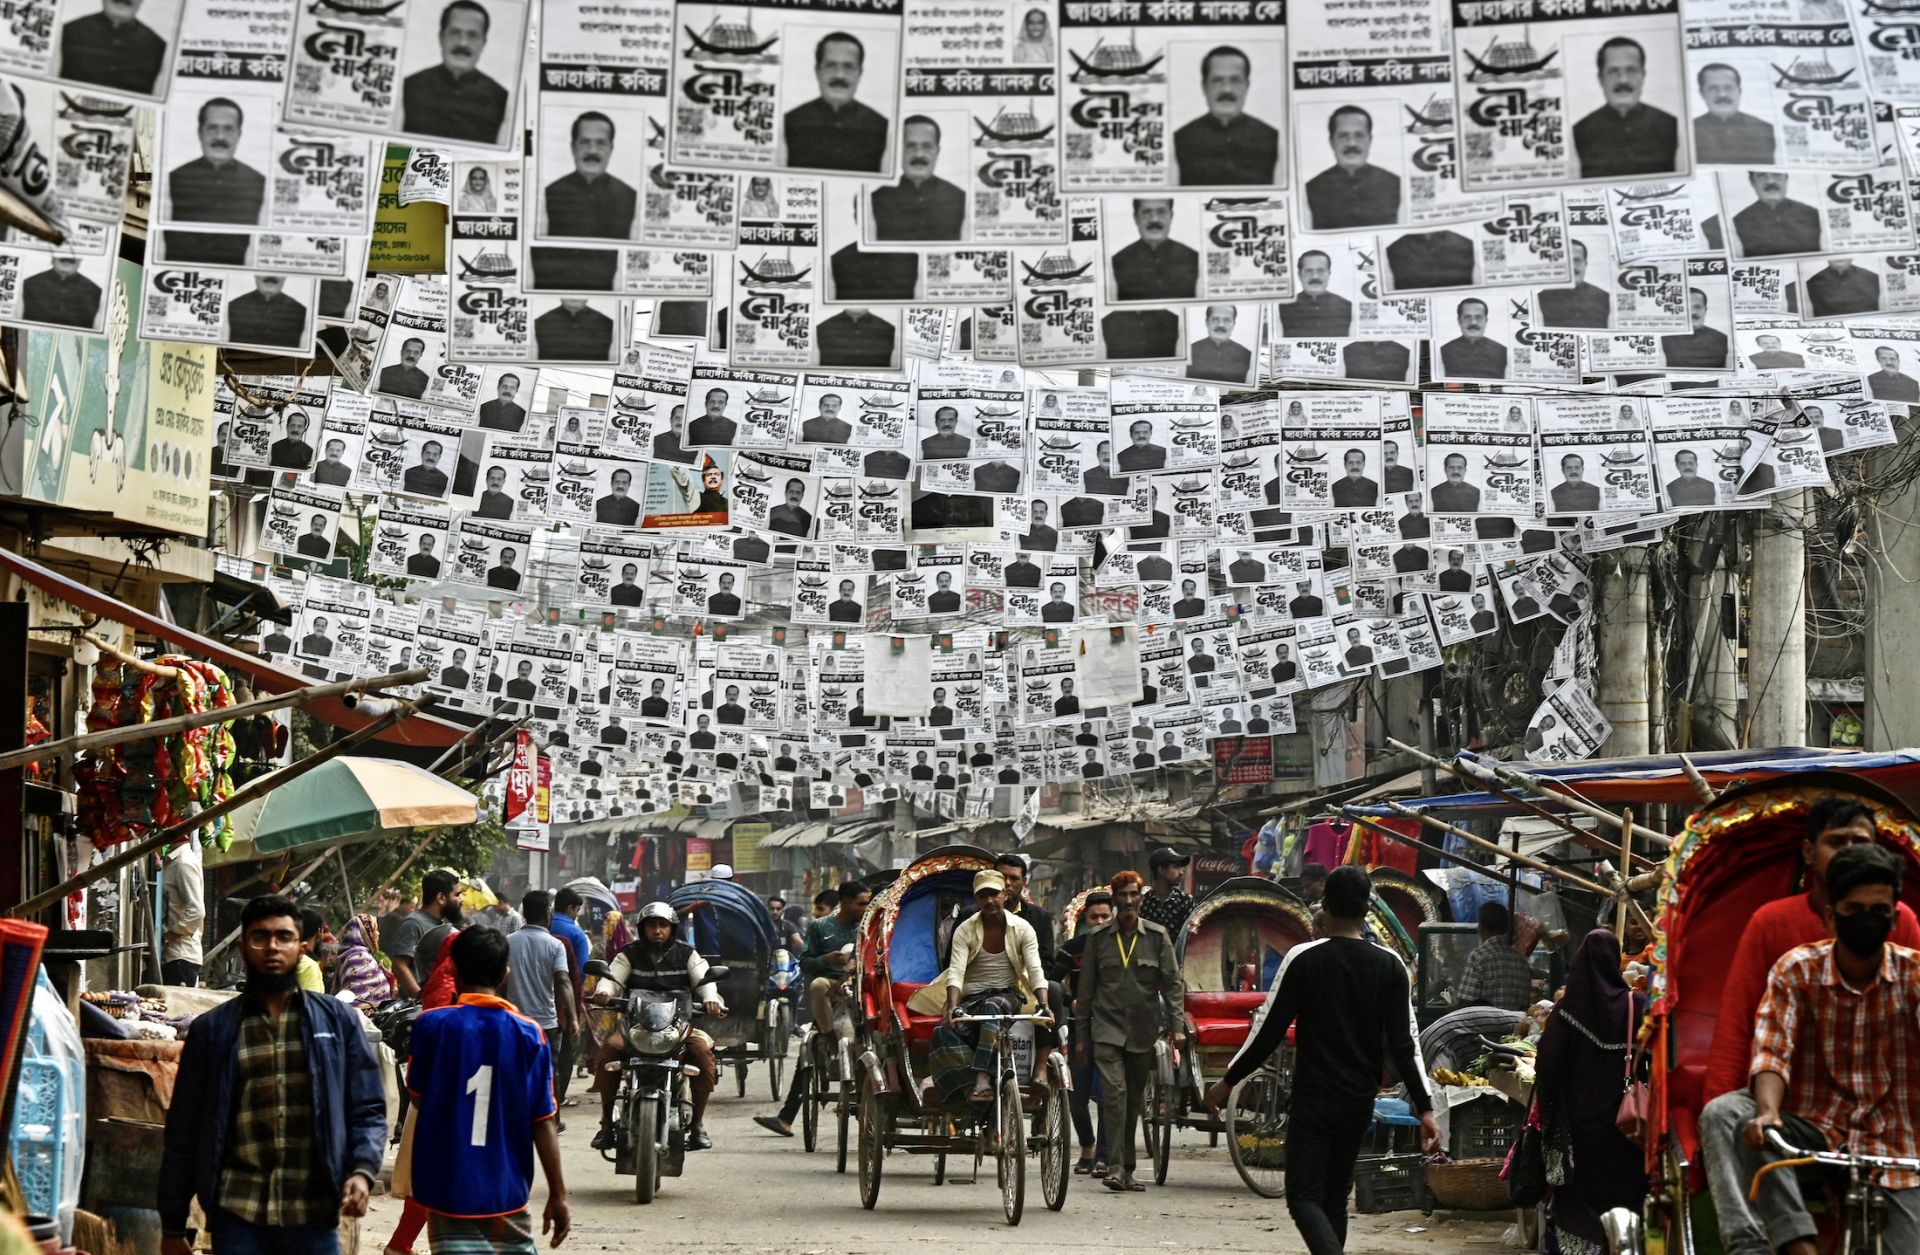 Posters of Bangladesh's election candidates hang over a street in Dhaka on Dec. 26, 2023, ahead of the 2024 general elections.